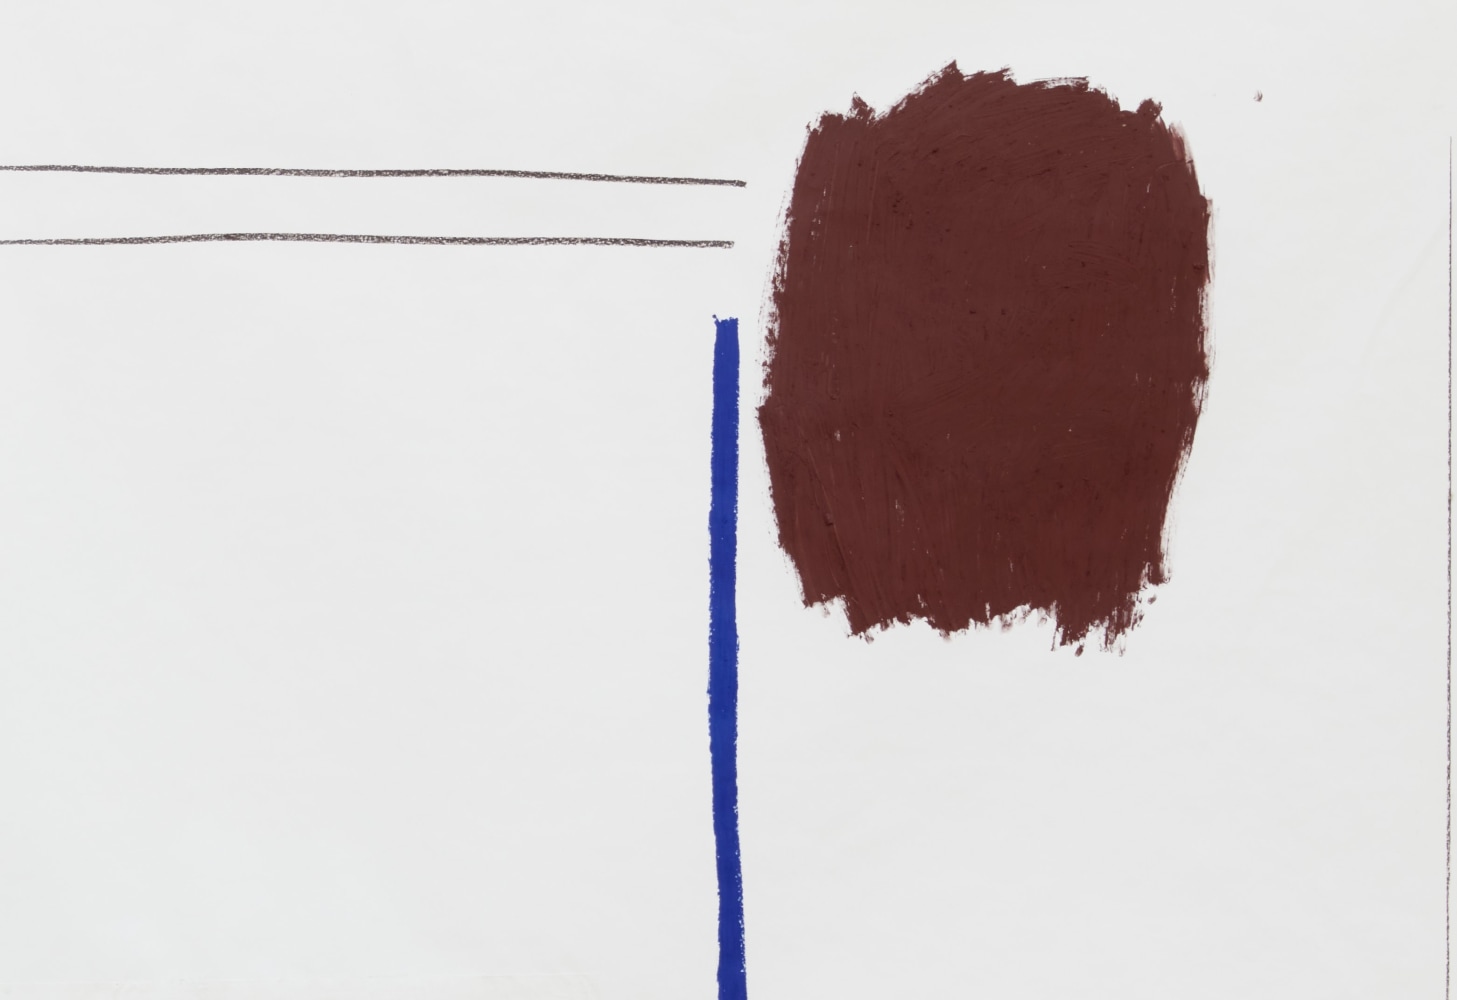 Esther Kläs WAYS, 2021 oilstick and pastel on paper 78 3/4 x 118 7/8 inches (200 x 302 cm)